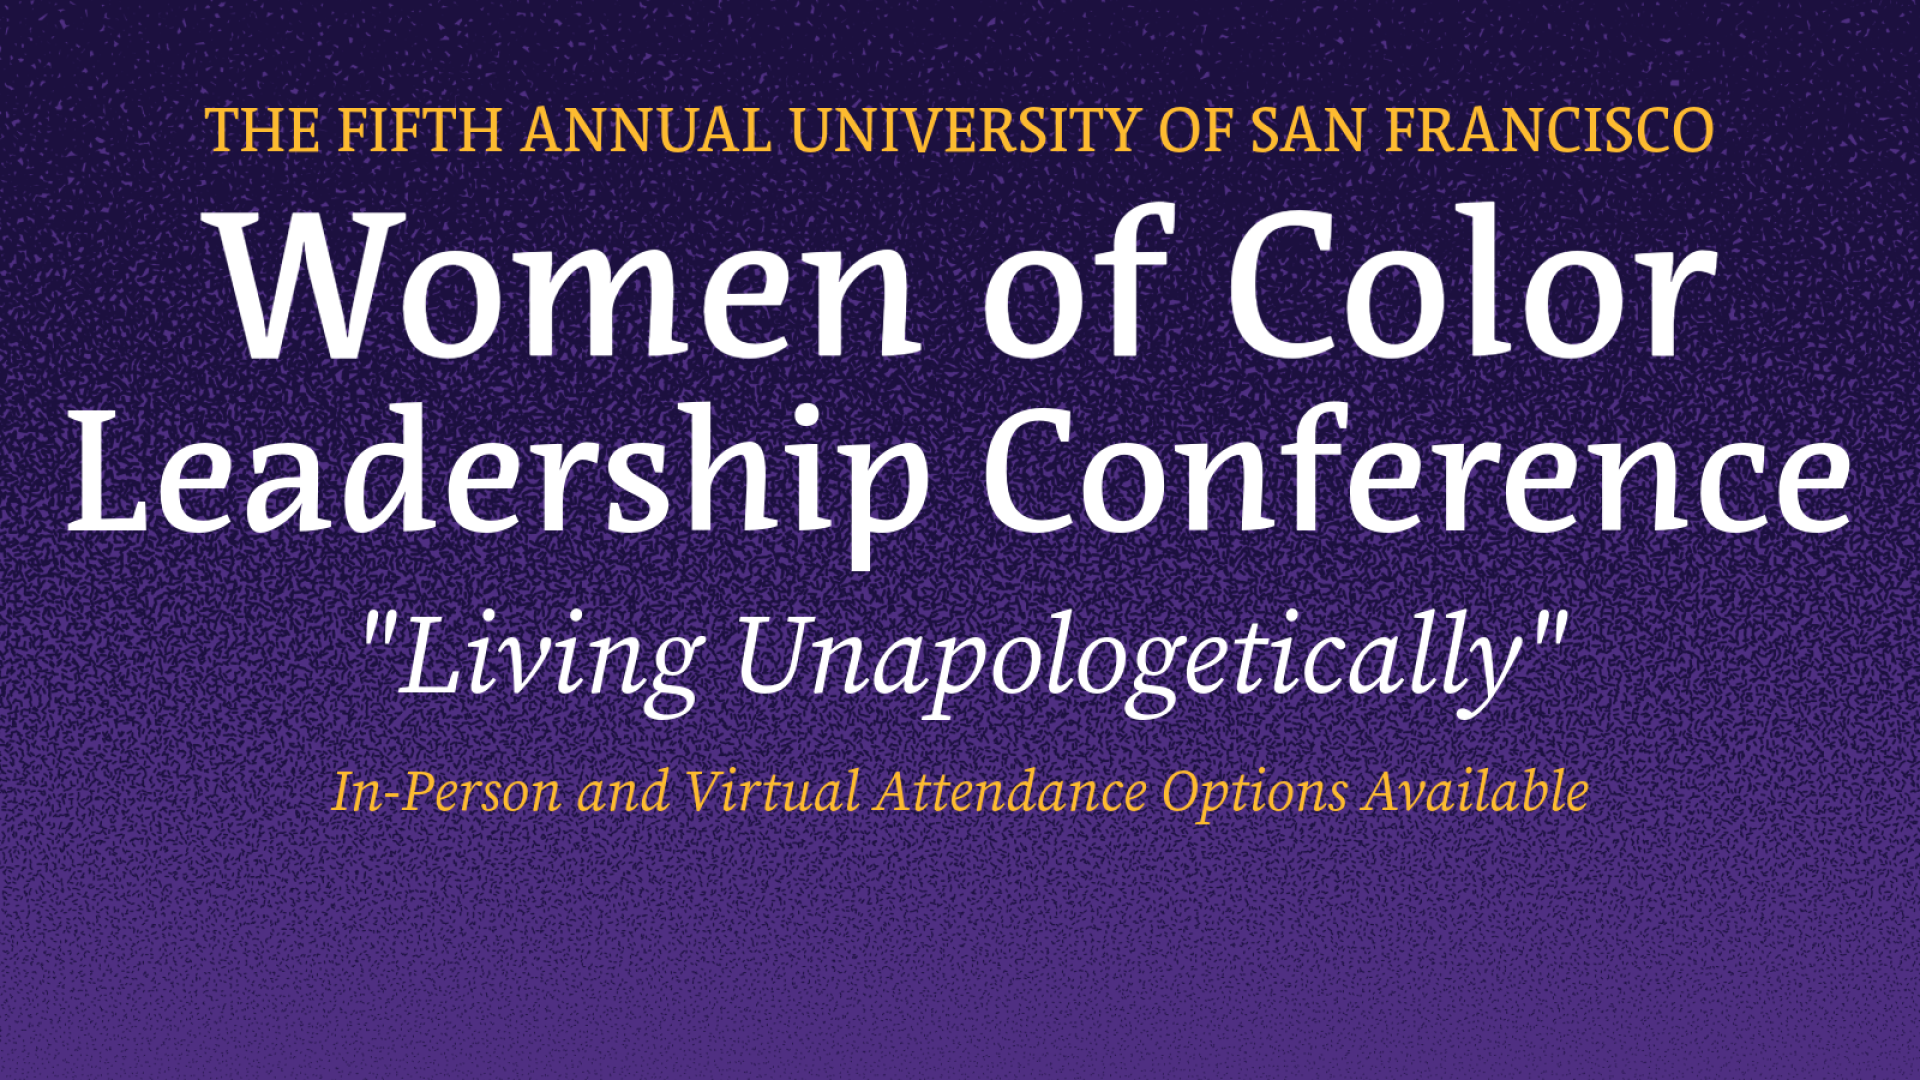 The fifth annual university of san francisco Women of Color Leadership conference. &quot;Living Unapologetically&quot; in person and virtual attendance options available